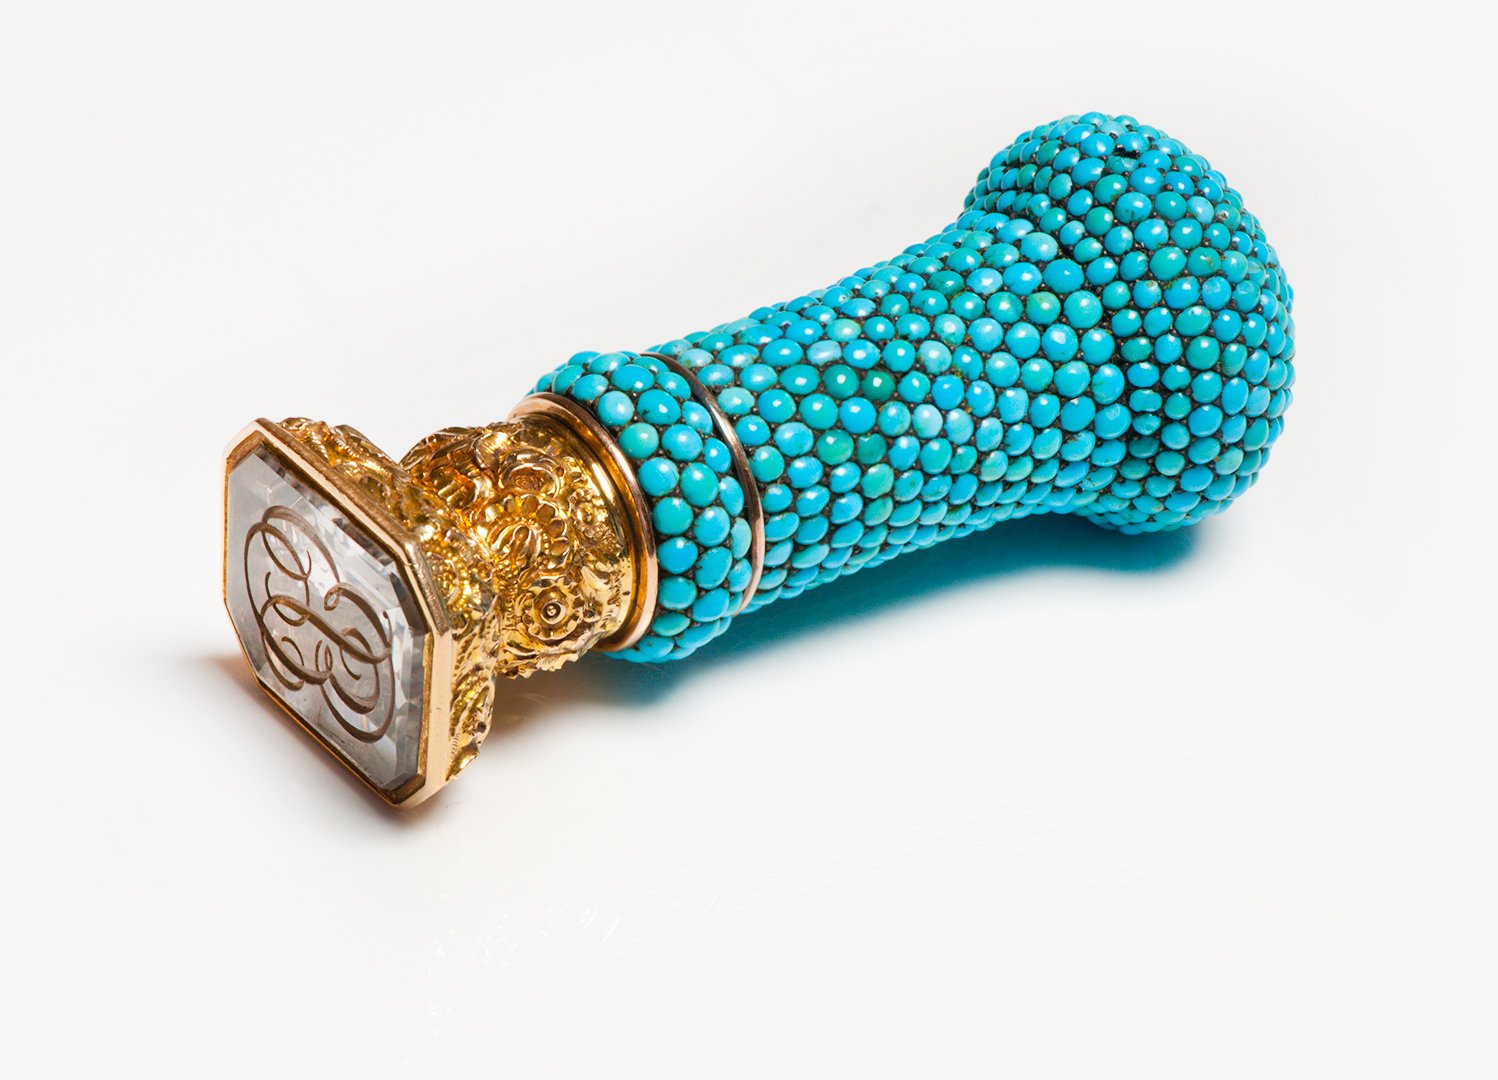 Magnificent Antique Gold Seal Encrusted with Turquoise